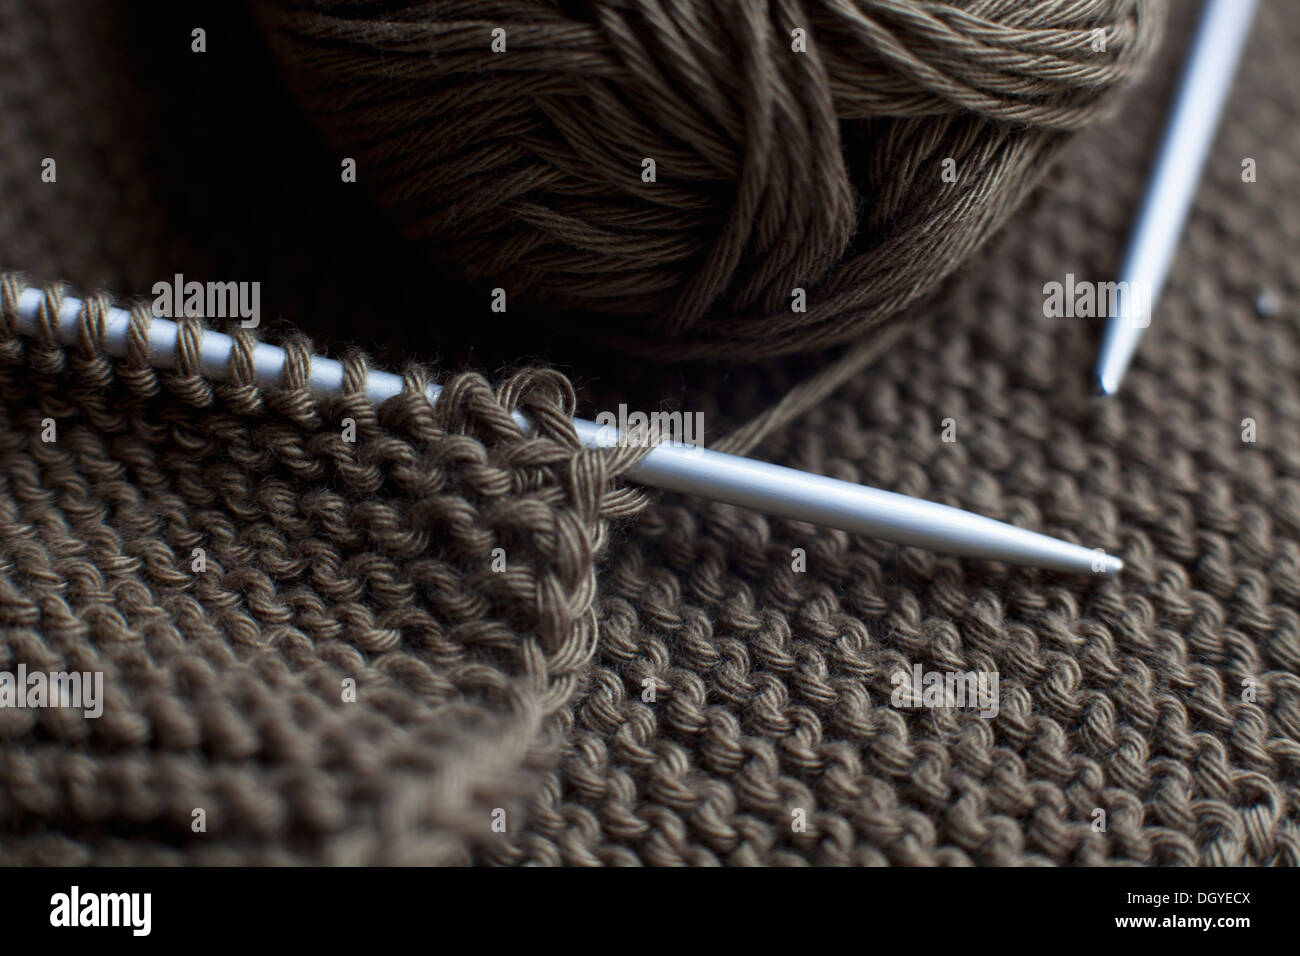 A pair of knitting needles, knitting and a ball of yarn, full frame Stock Photo